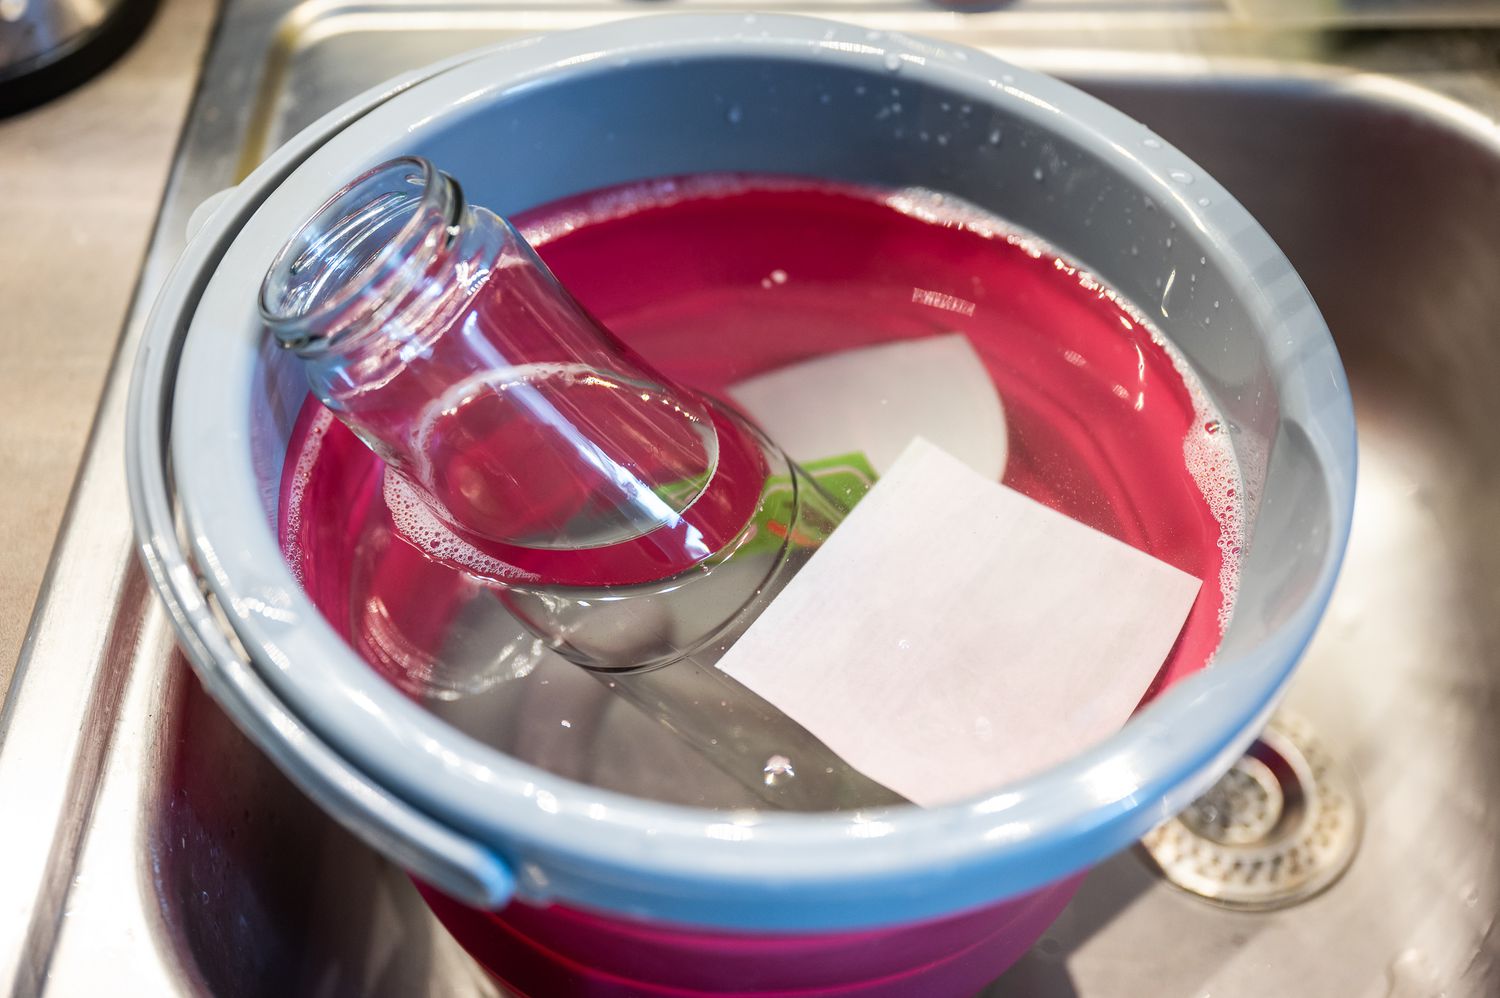 submerging glass with a label into a bucket of warm sudsy water